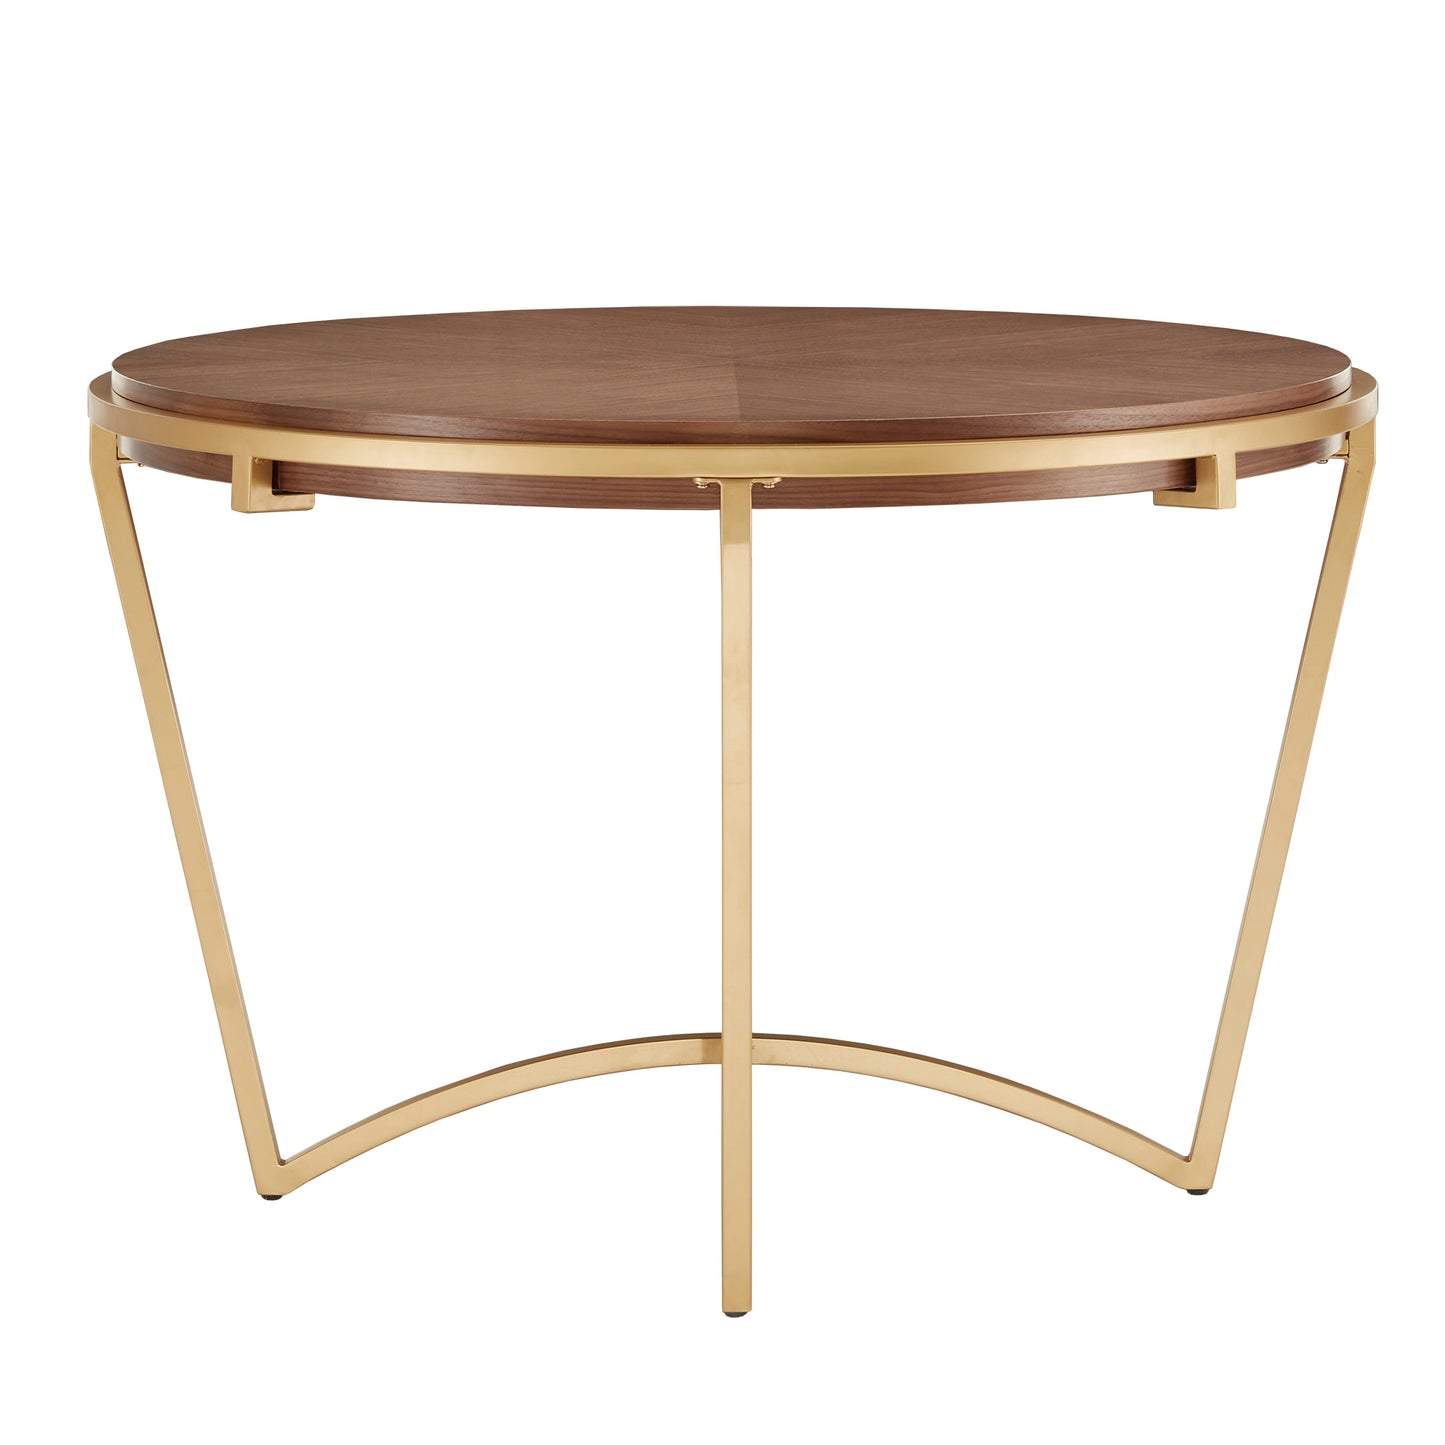 Natural Finish Dining Table With Gold Metal Base